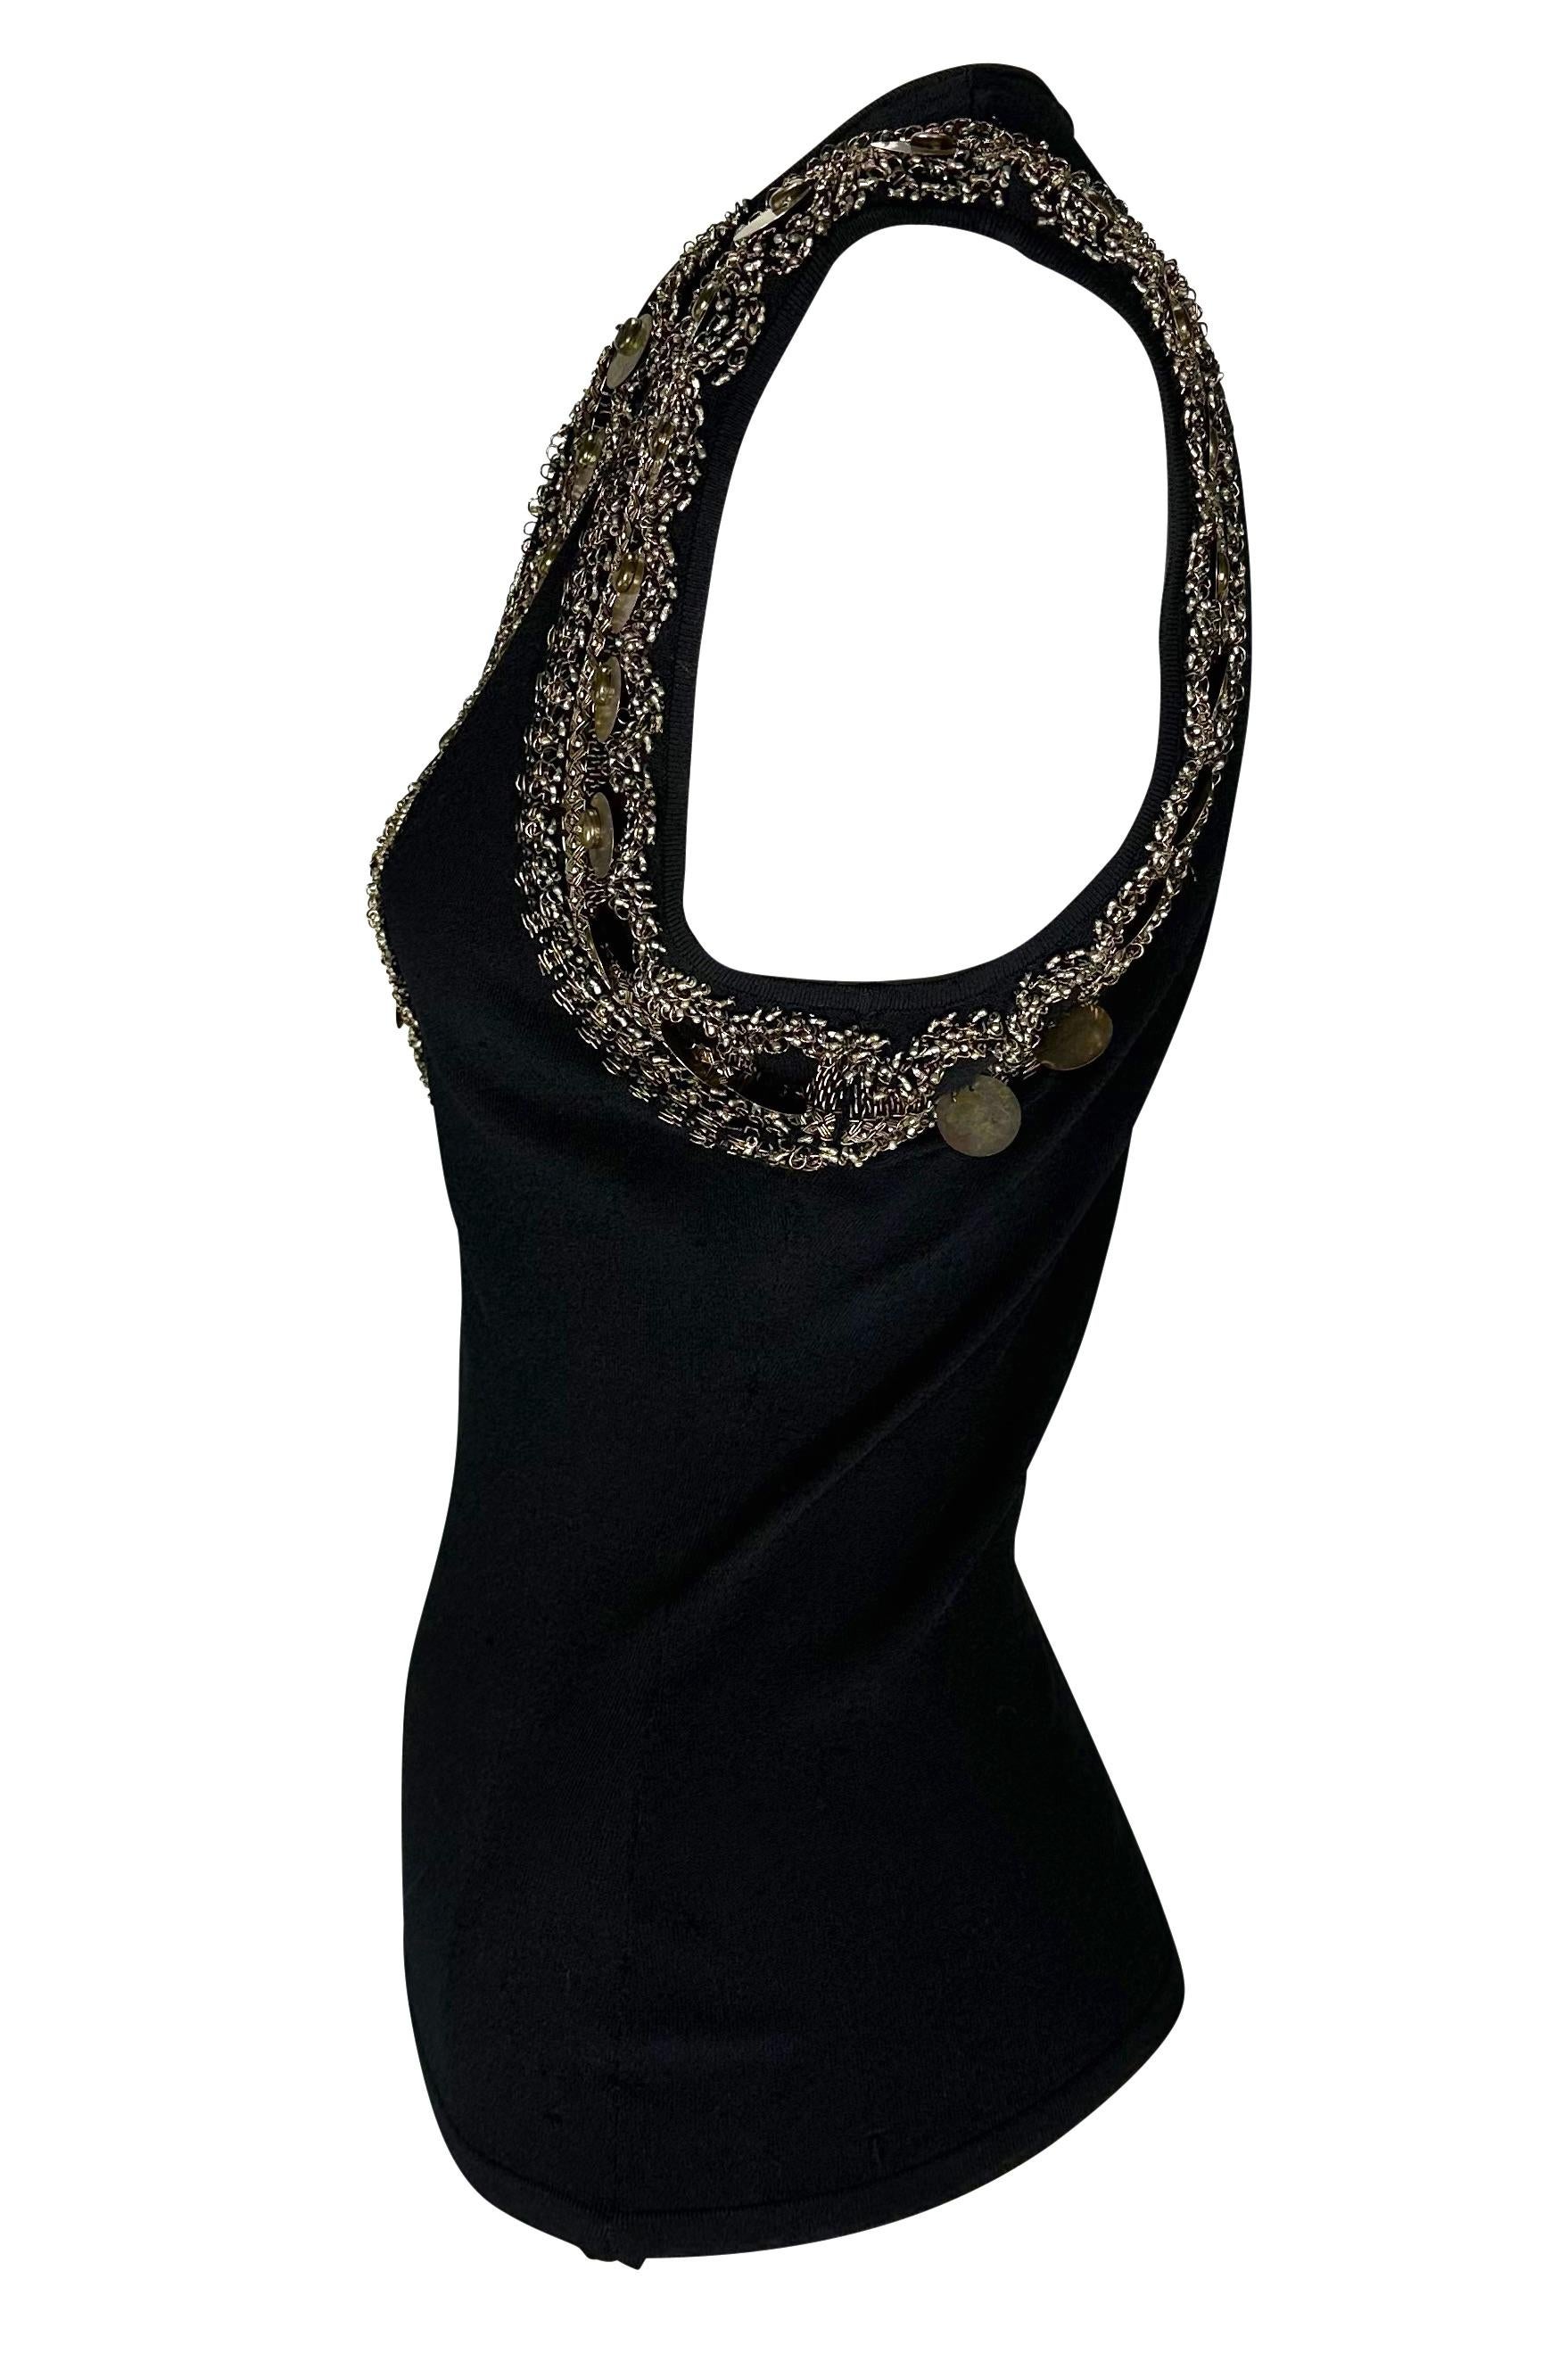 S/S 2004 Versace by Donatella Brass Embroidered Beaded Black Knit Plunging Top In Good Condition For Sale In West Hollywood, CA